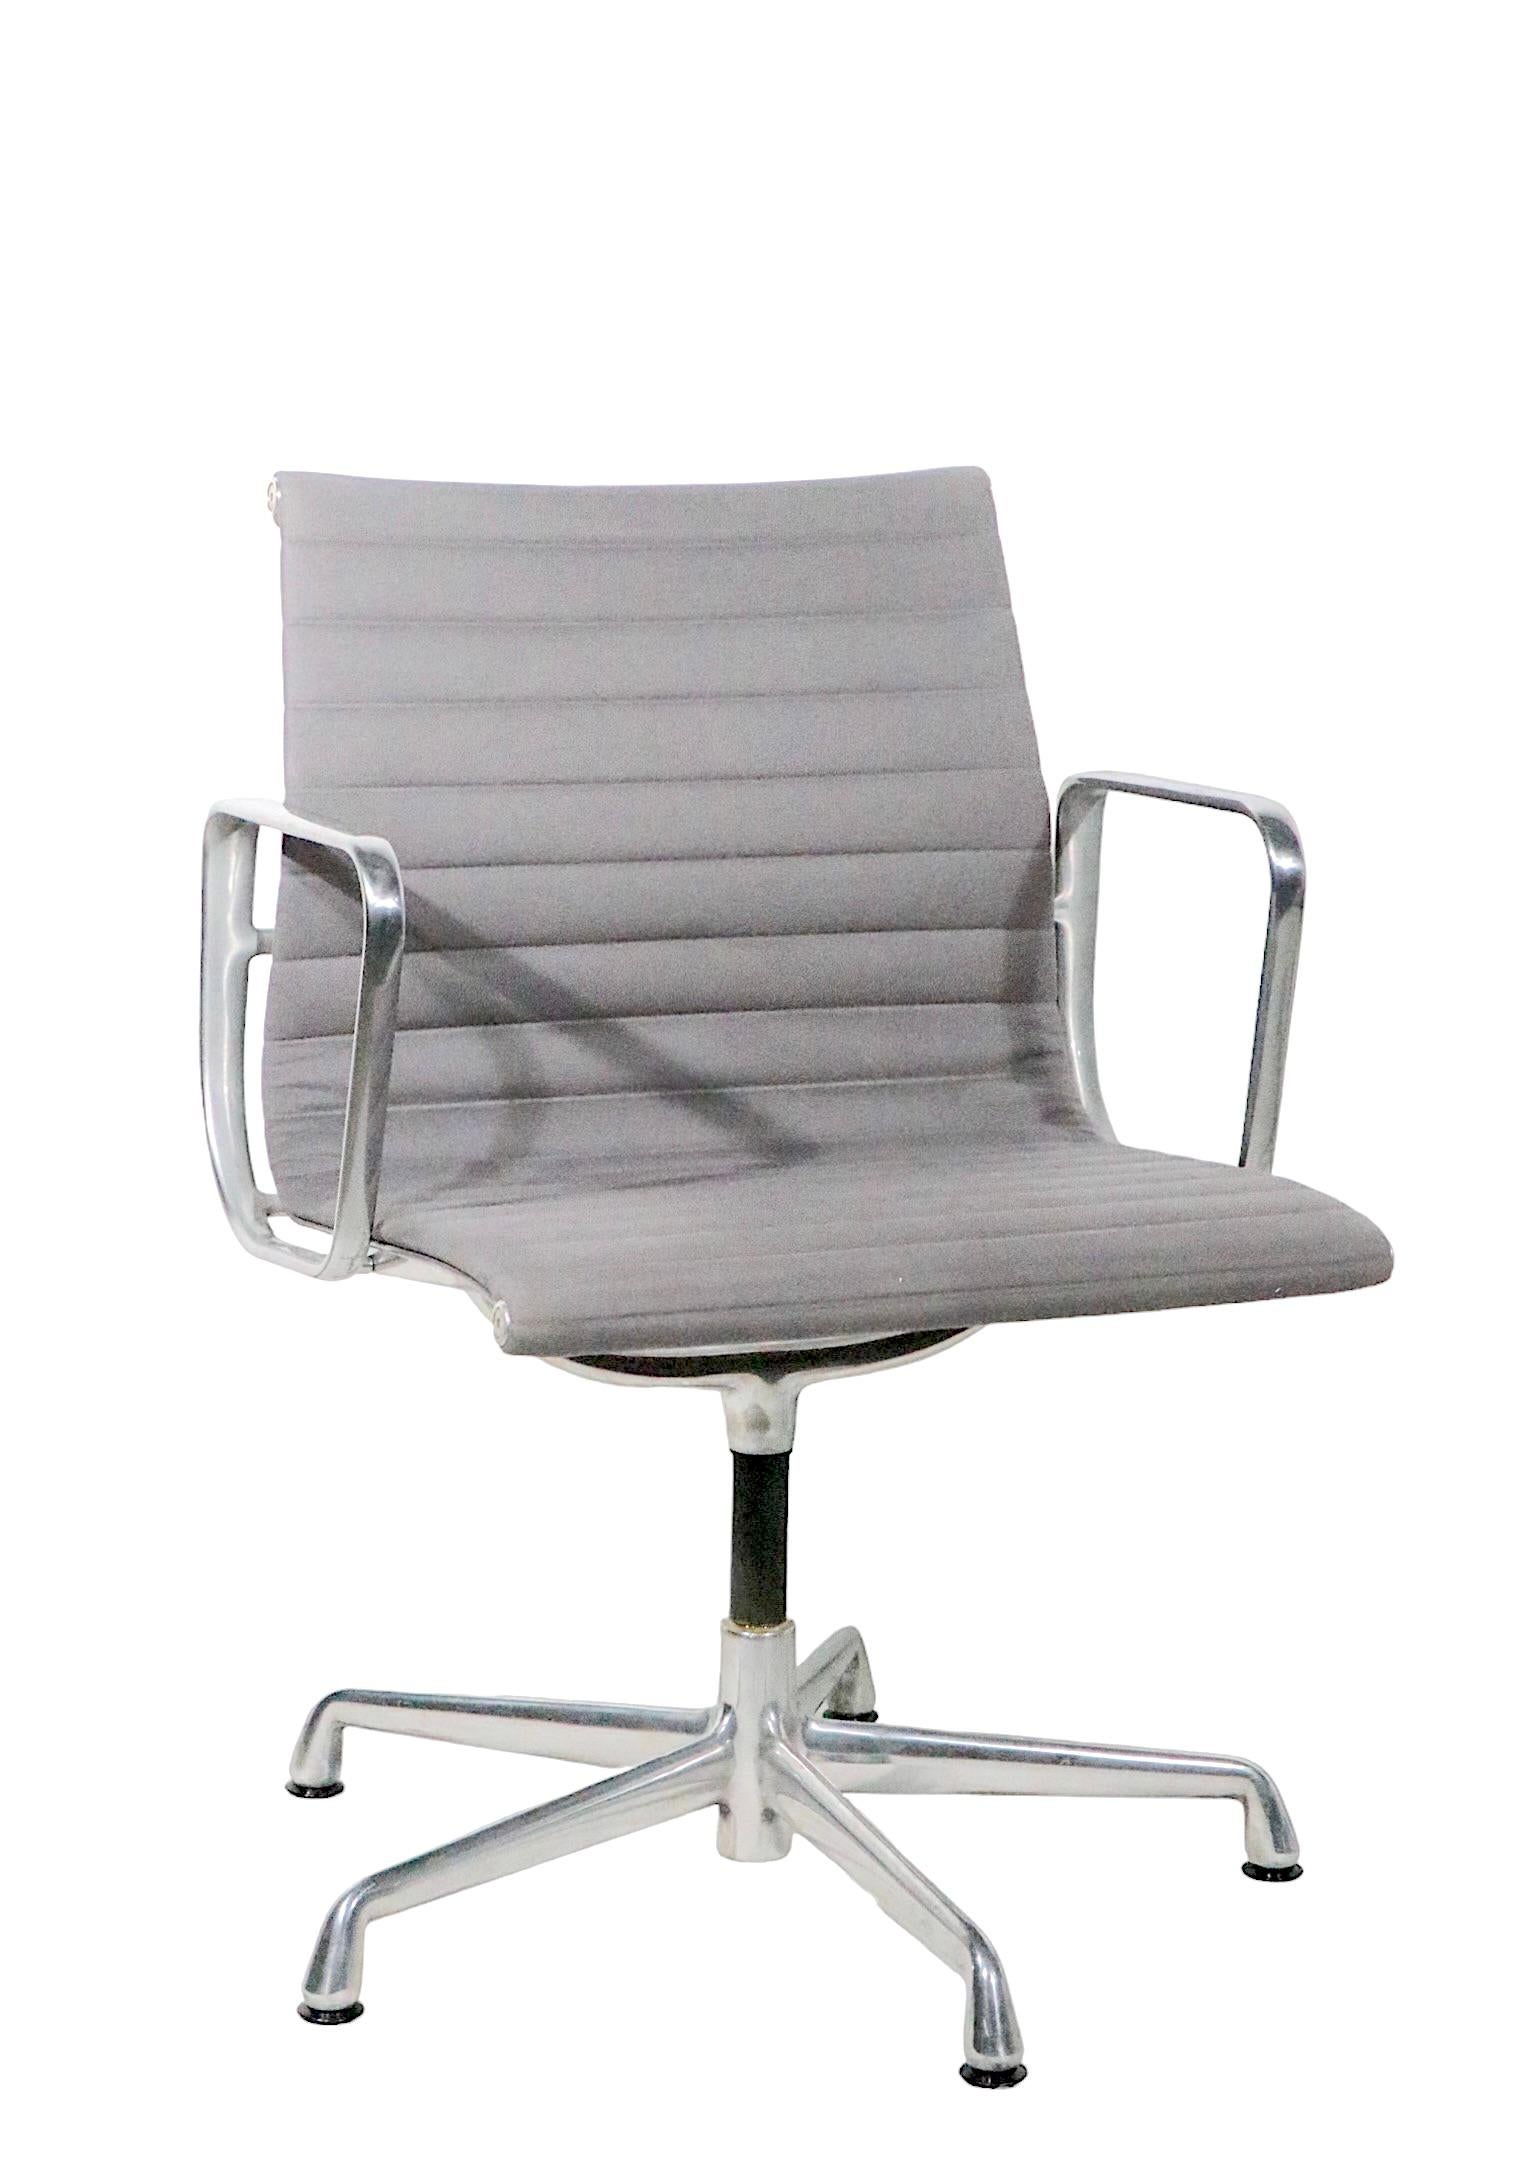 Eames Management Chairs in Grey Fabric Upholstery c. 1980 - 1990s 4 Available  For Sale 5